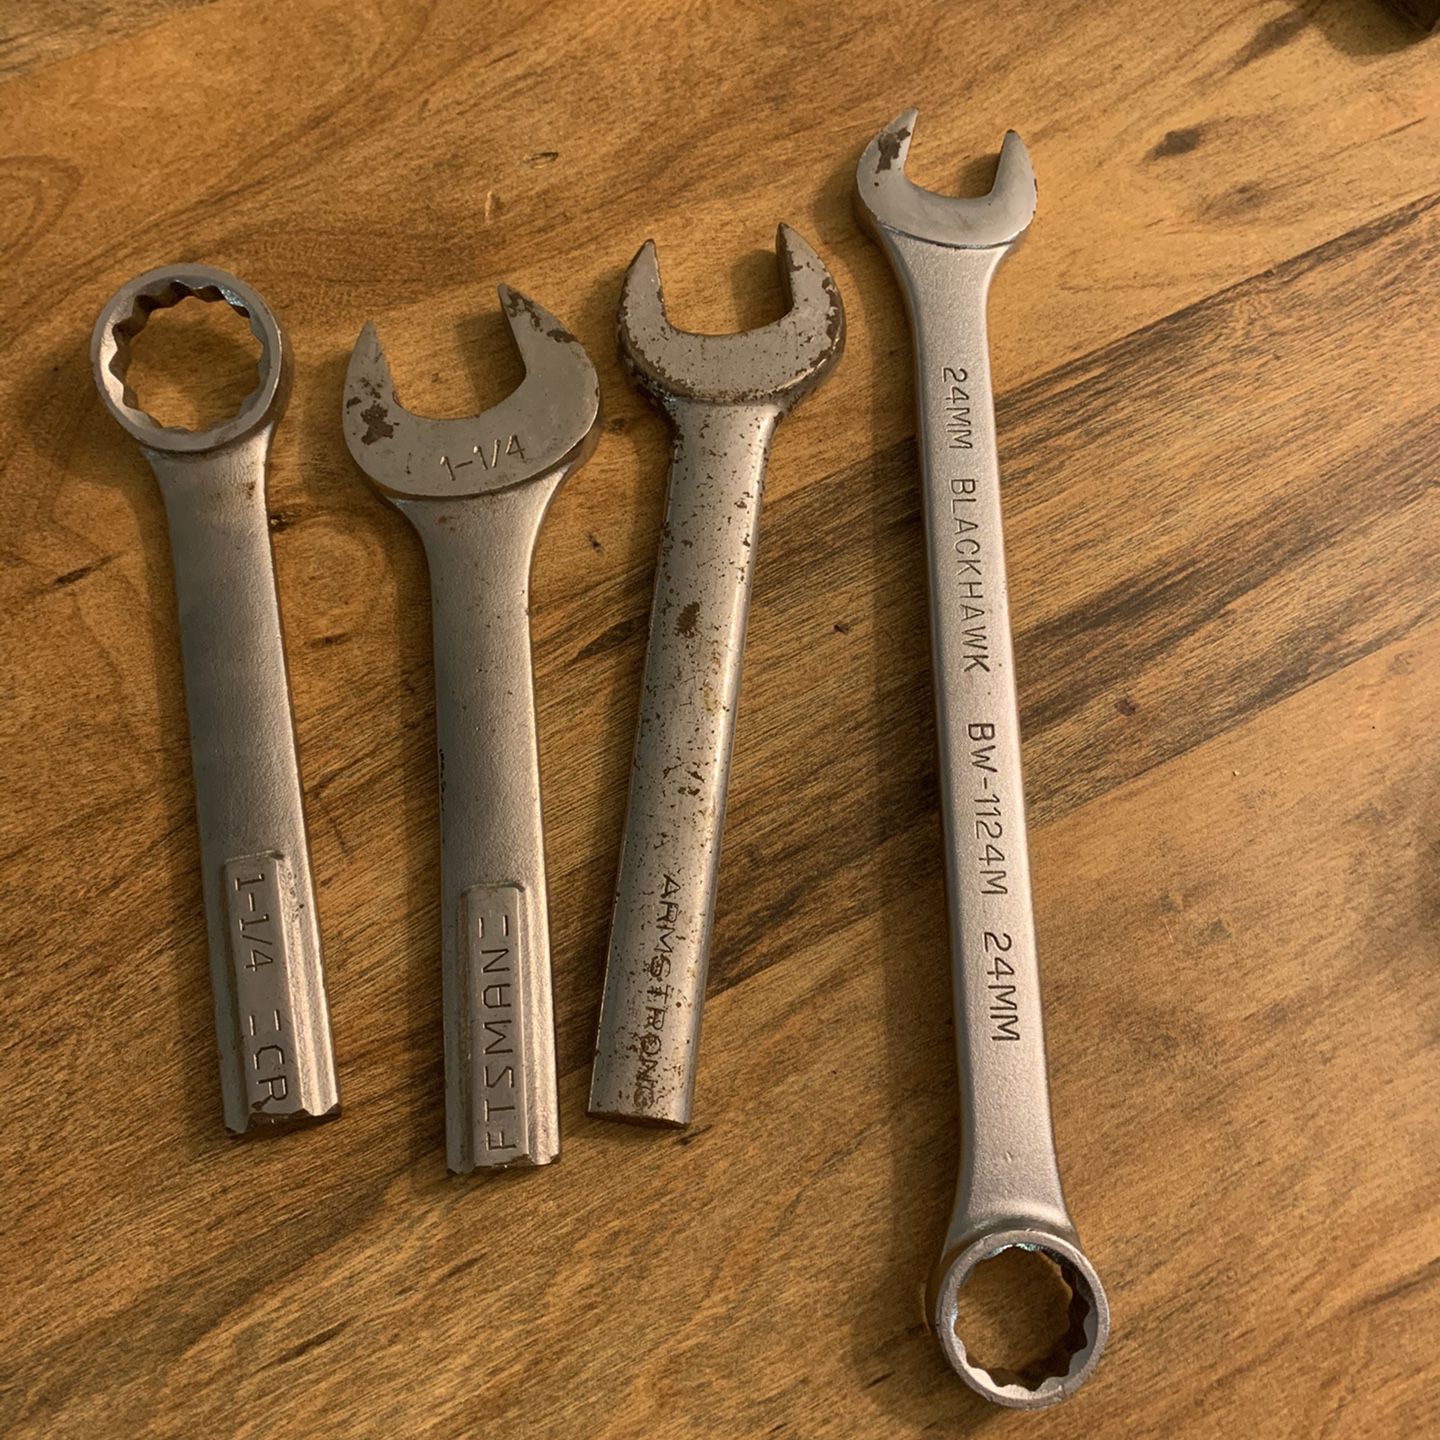 24mm blackhawk bw-1124m combo wrench and others